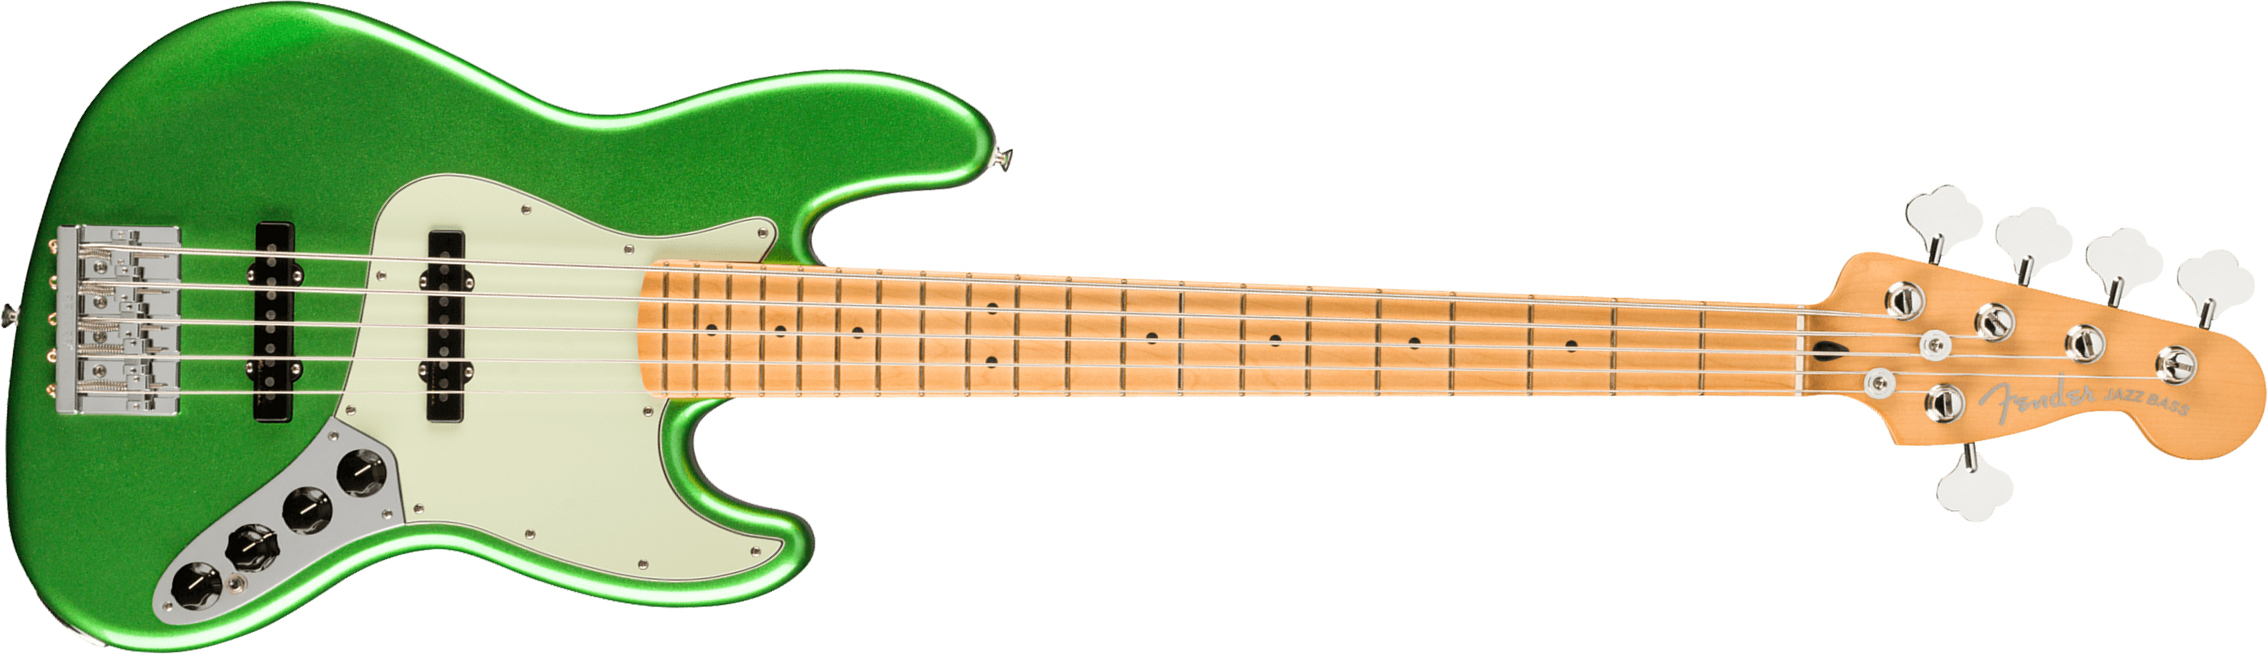 Fender Jazz Bass Player Plus V Mex 5c Active Mn - Cosmic Jade - Basse Électrique Solid Body - Main picture